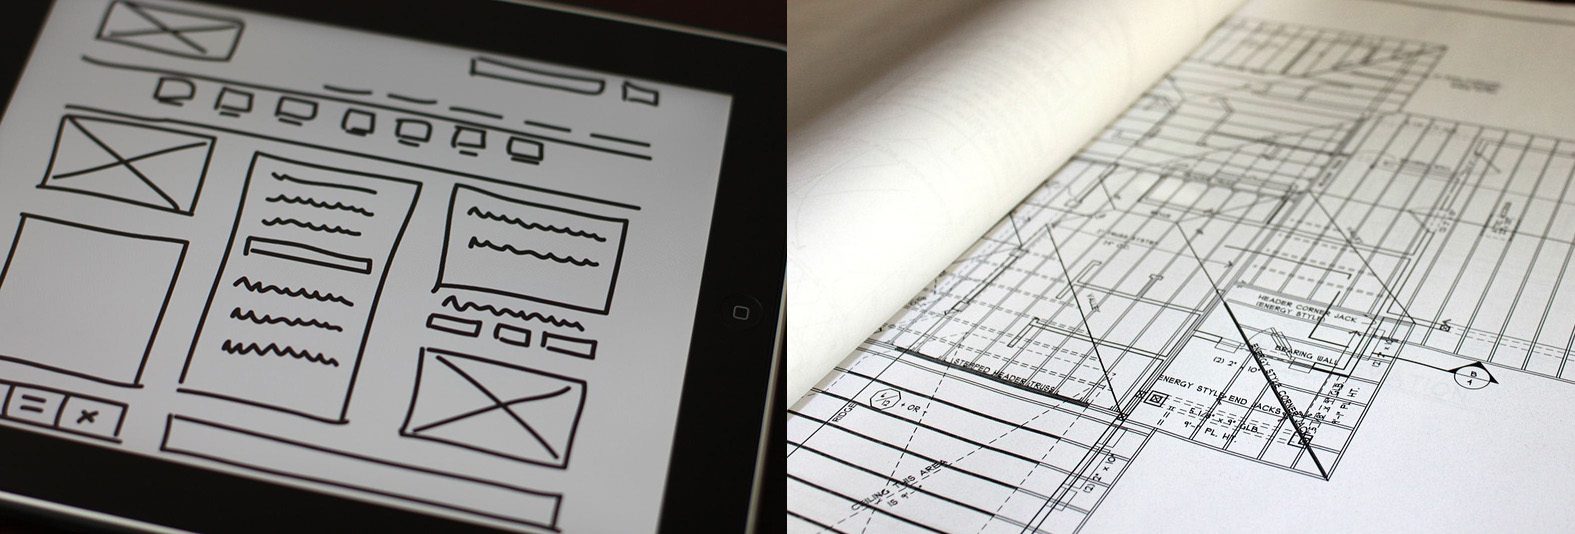 Blueprints vs. Website Wireframes: There isn't much difference.